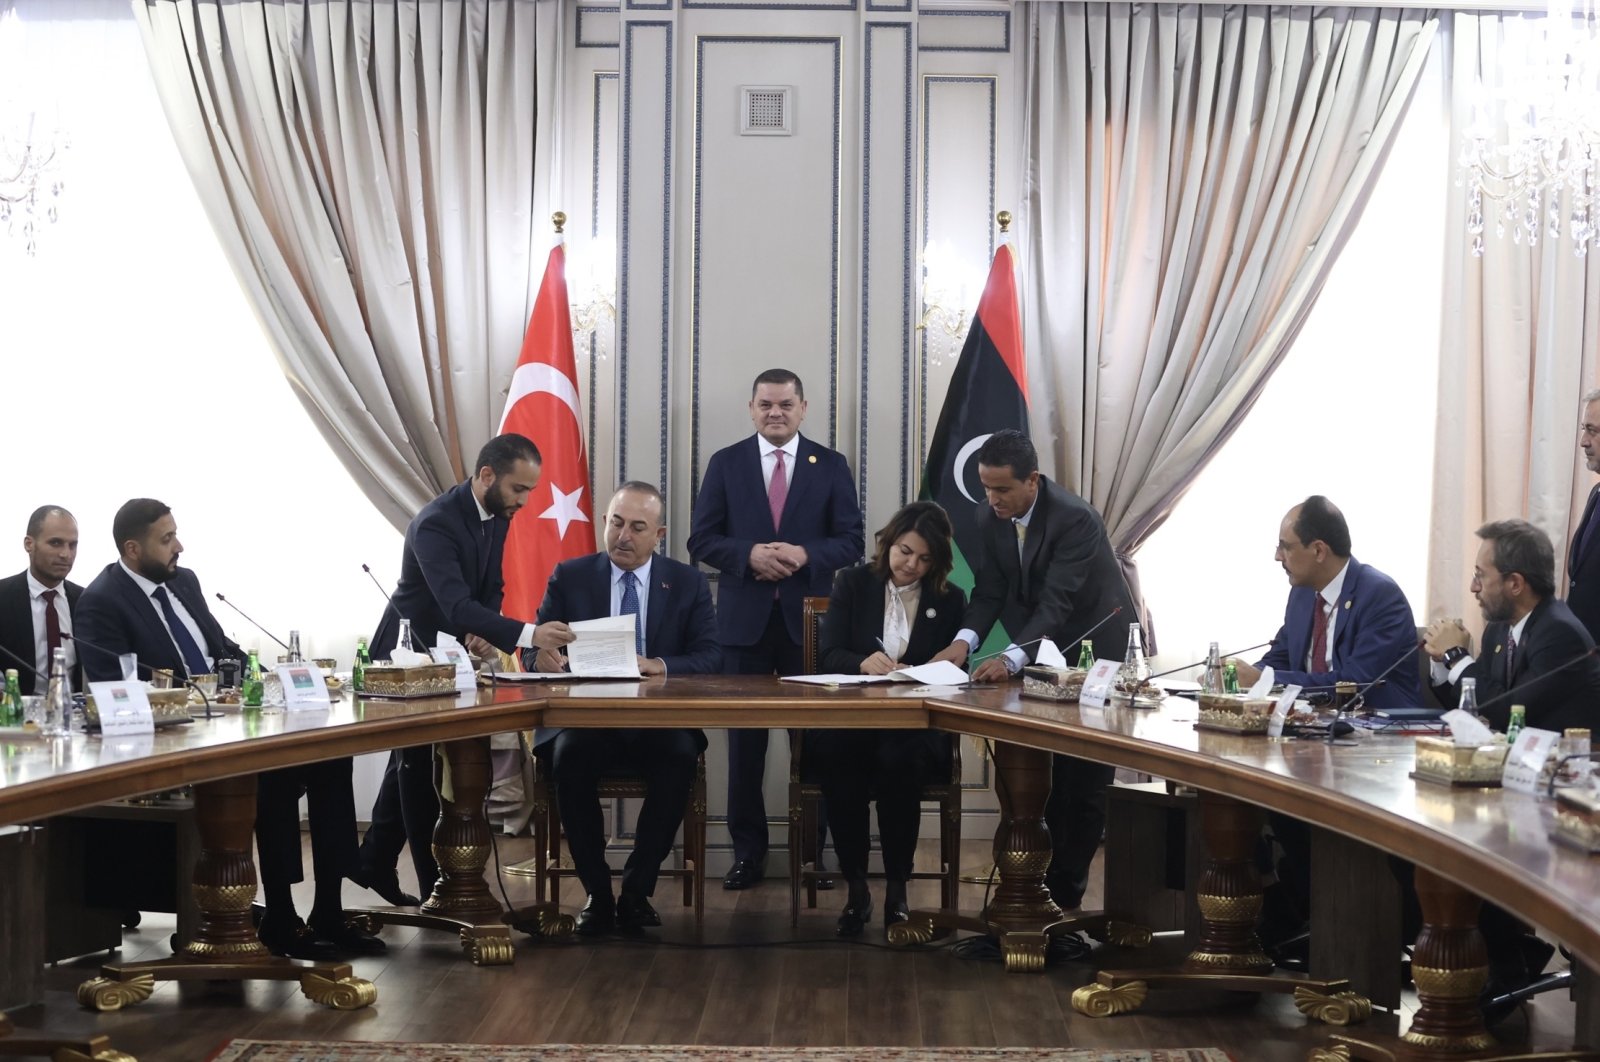 Leader of the Tripoli-based unity government and Prime Minister Abdul Hamid Mohammed Dbeibah (top C) oversees signing of agreements between Türkiye and Libya by Foreign Minister Mevlüt Çavuşoğlu (4th L) and Libyan Foreign Minister Najla Mangoush (4th R), in the capital Tripoli, Libya, Oct. 3, 2022.